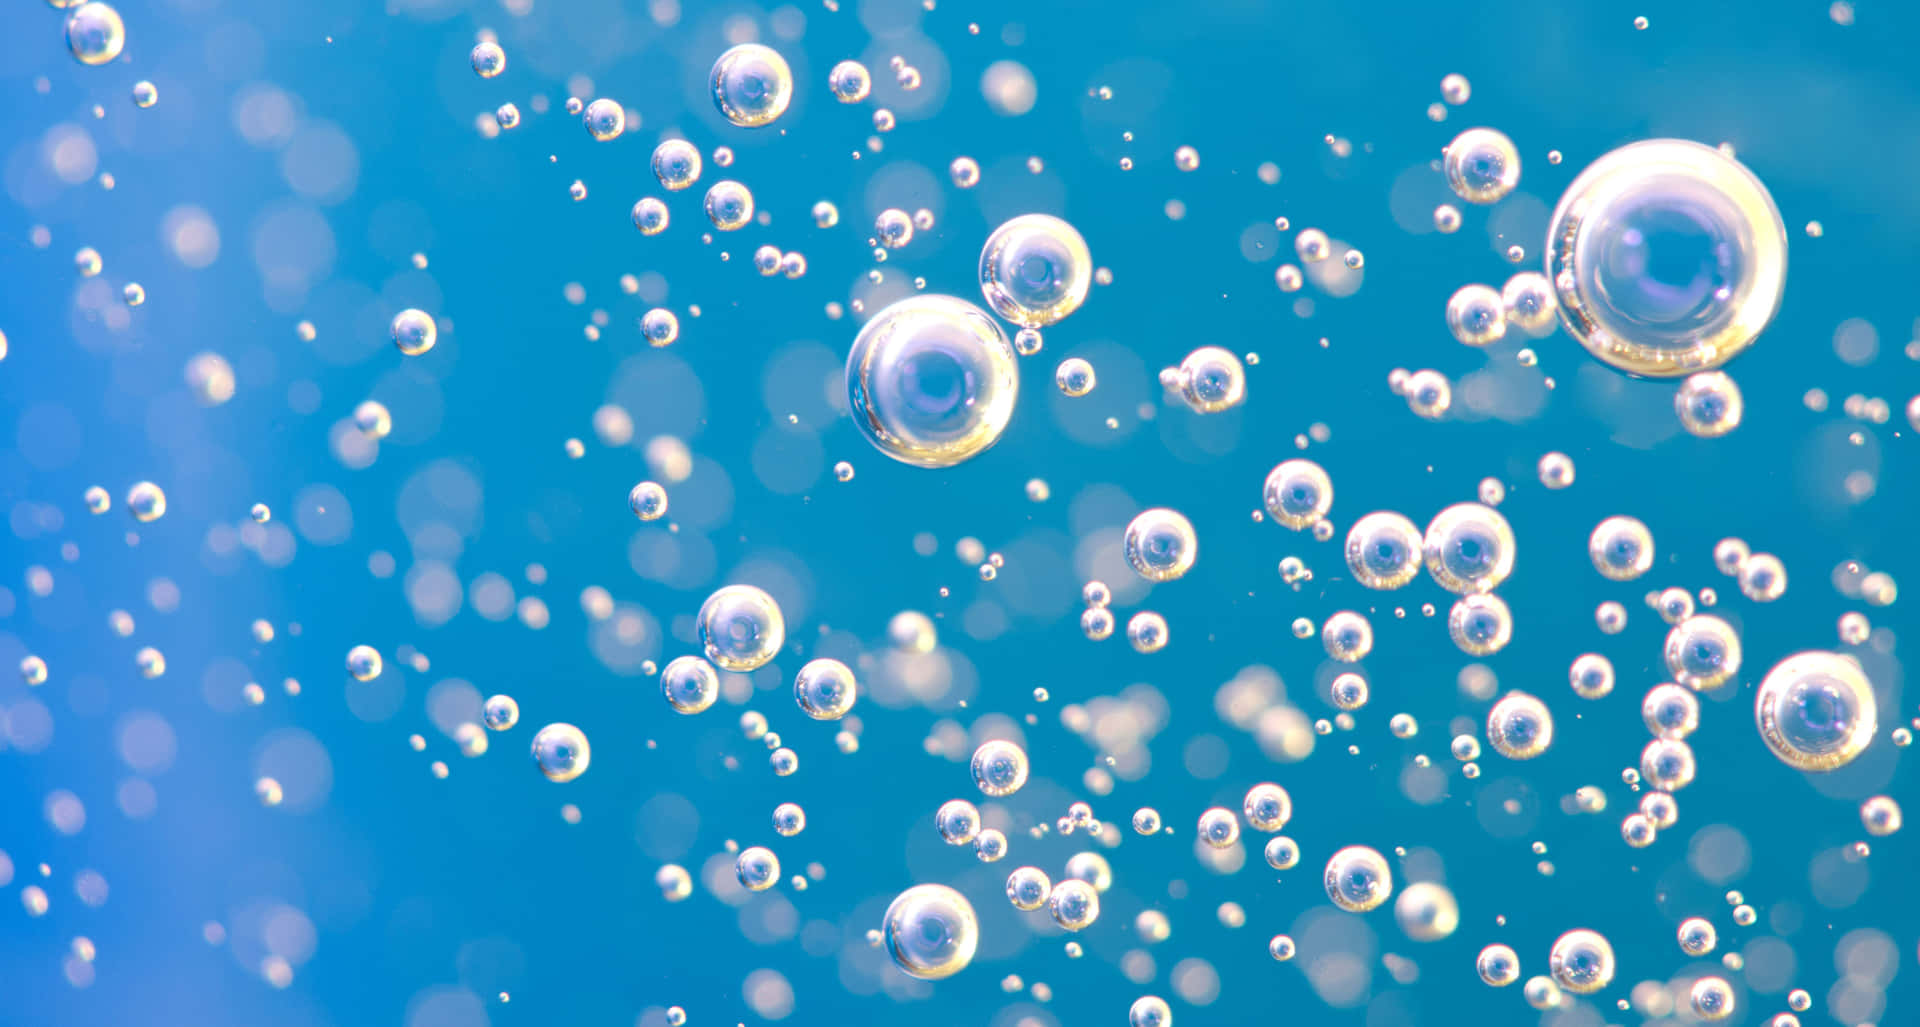 Discover the beauty of soap bubbles